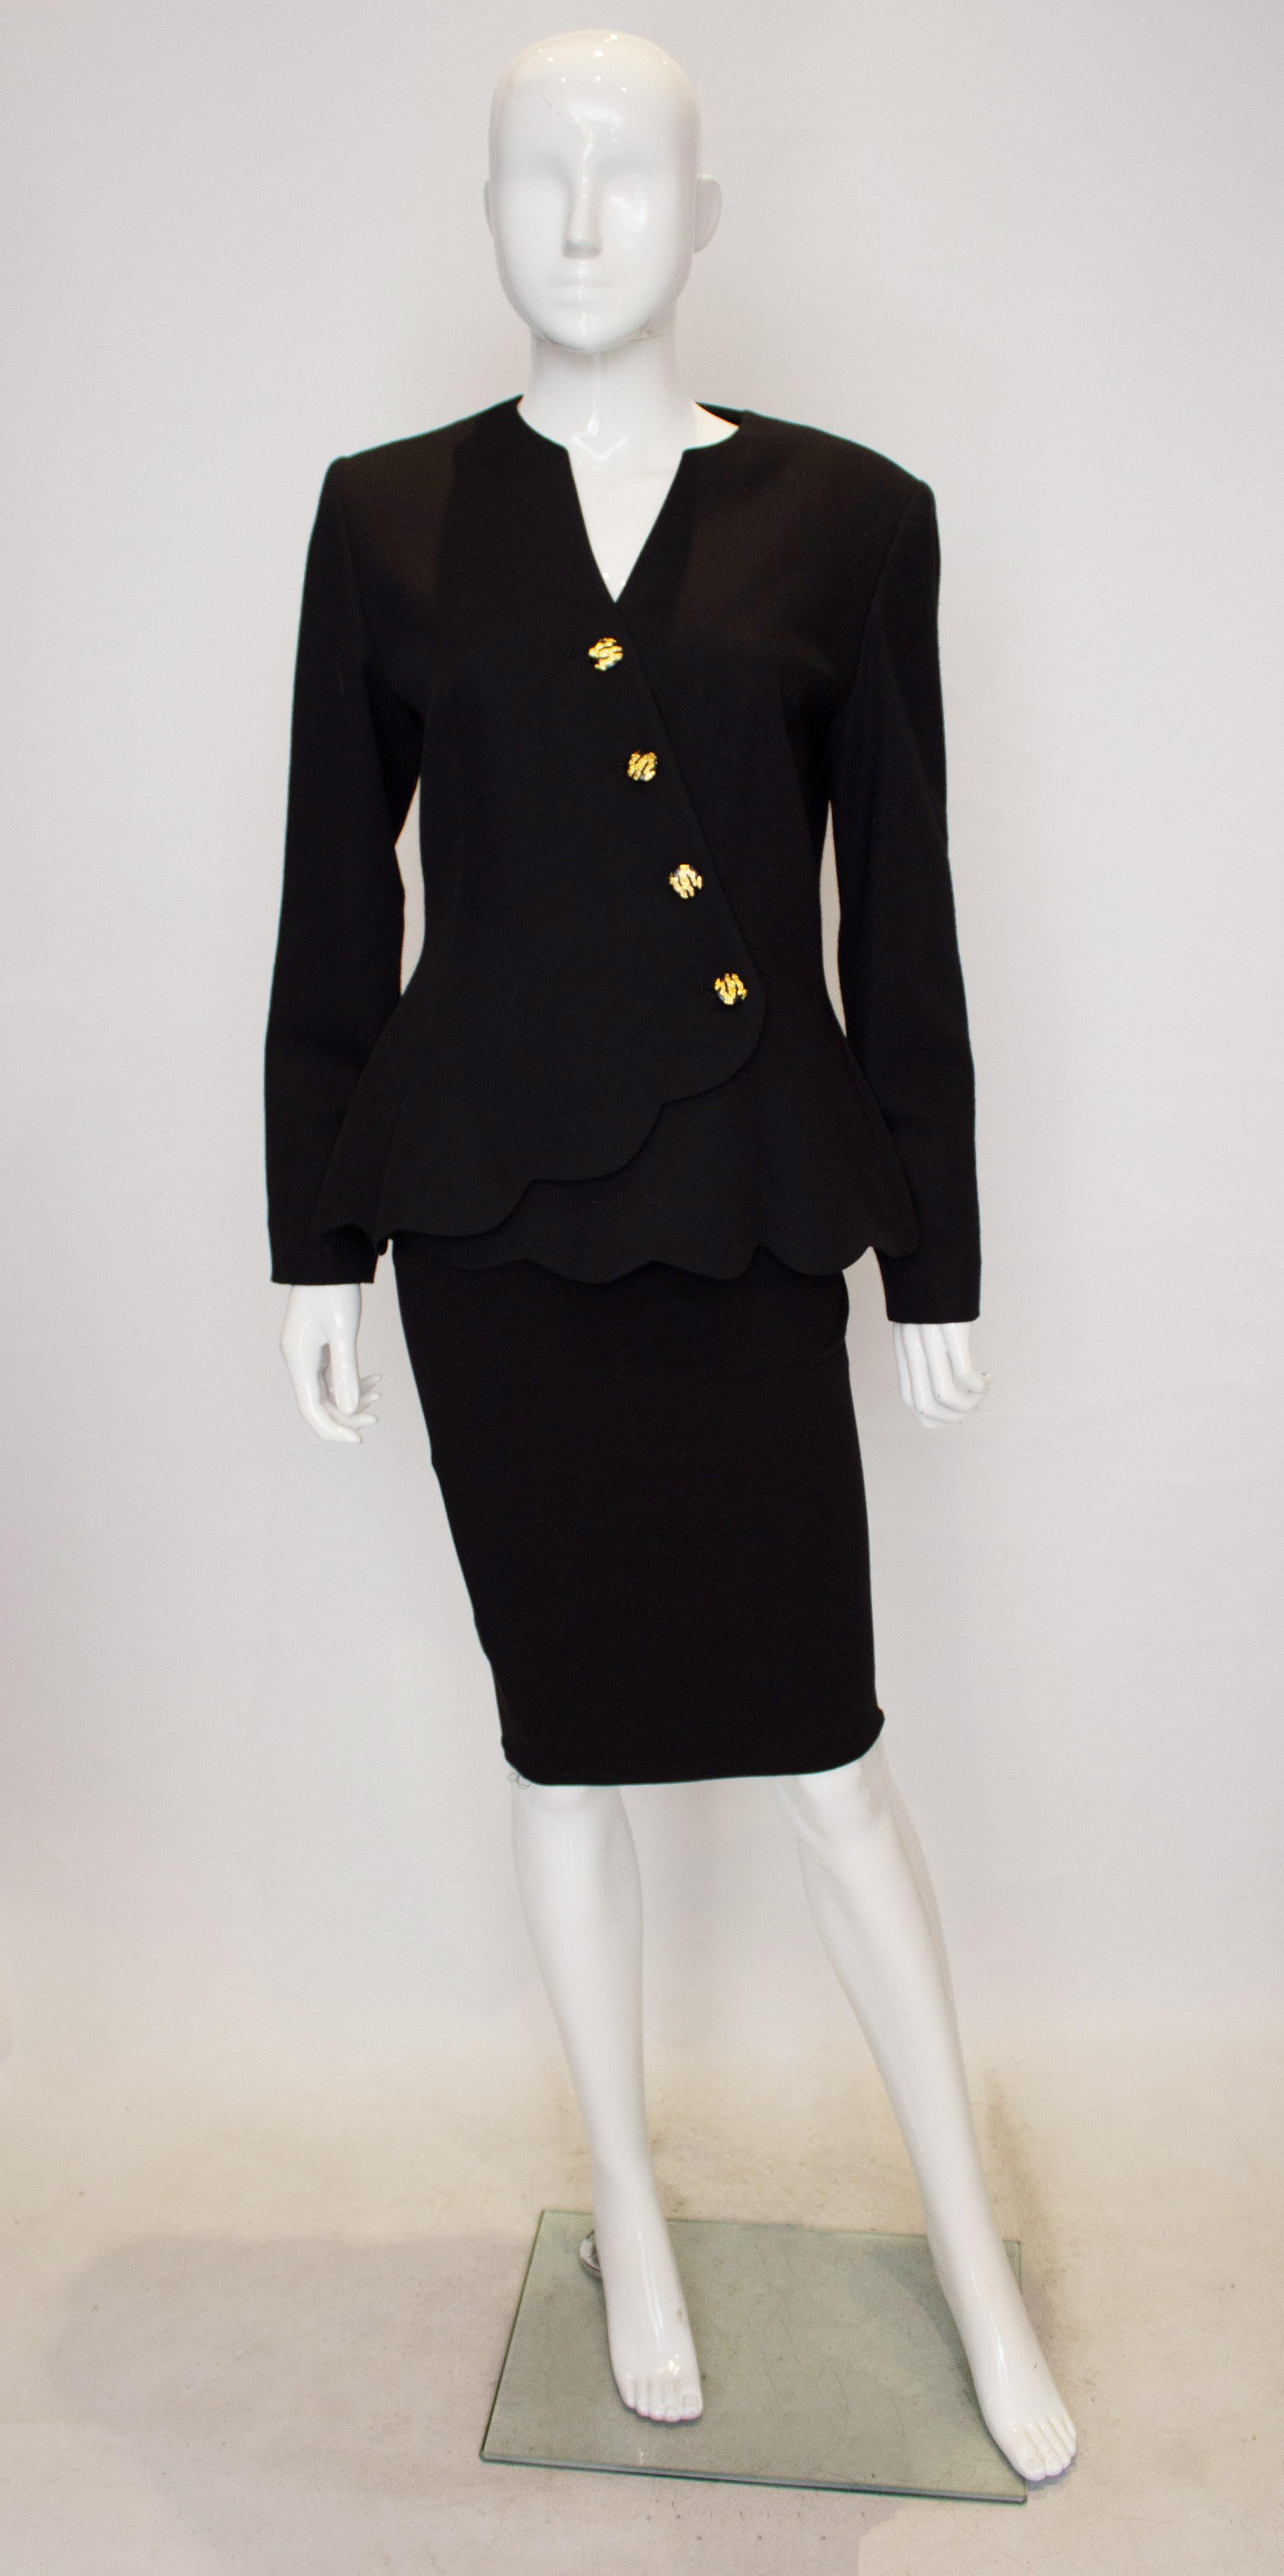 A chic vintage wool jacket by Peter Barron. The jacket has a wonderful neckline with diagonal fastening with gilt and navy/black buttons. It has a scalloped hem and is fully lined. 